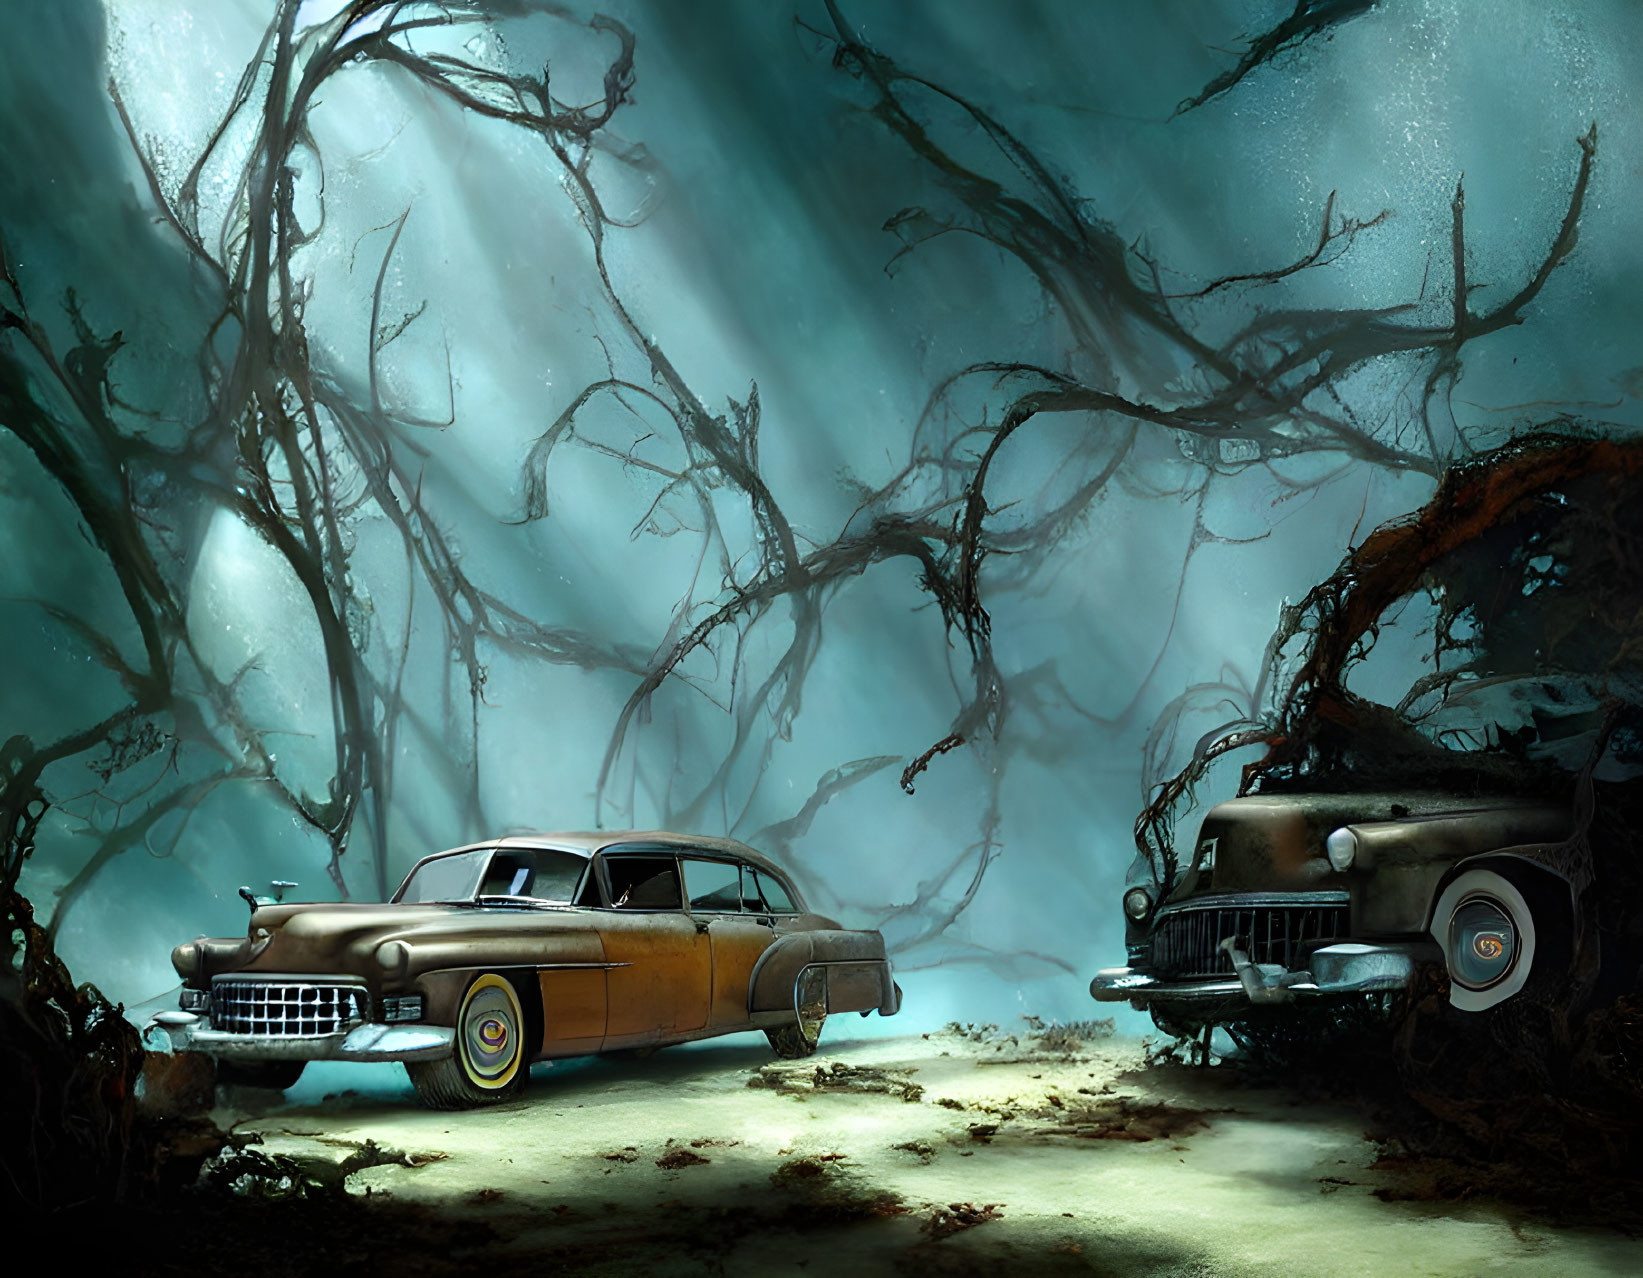 Vintage Cars Abandoned Underwater with Twisted Tree Branches